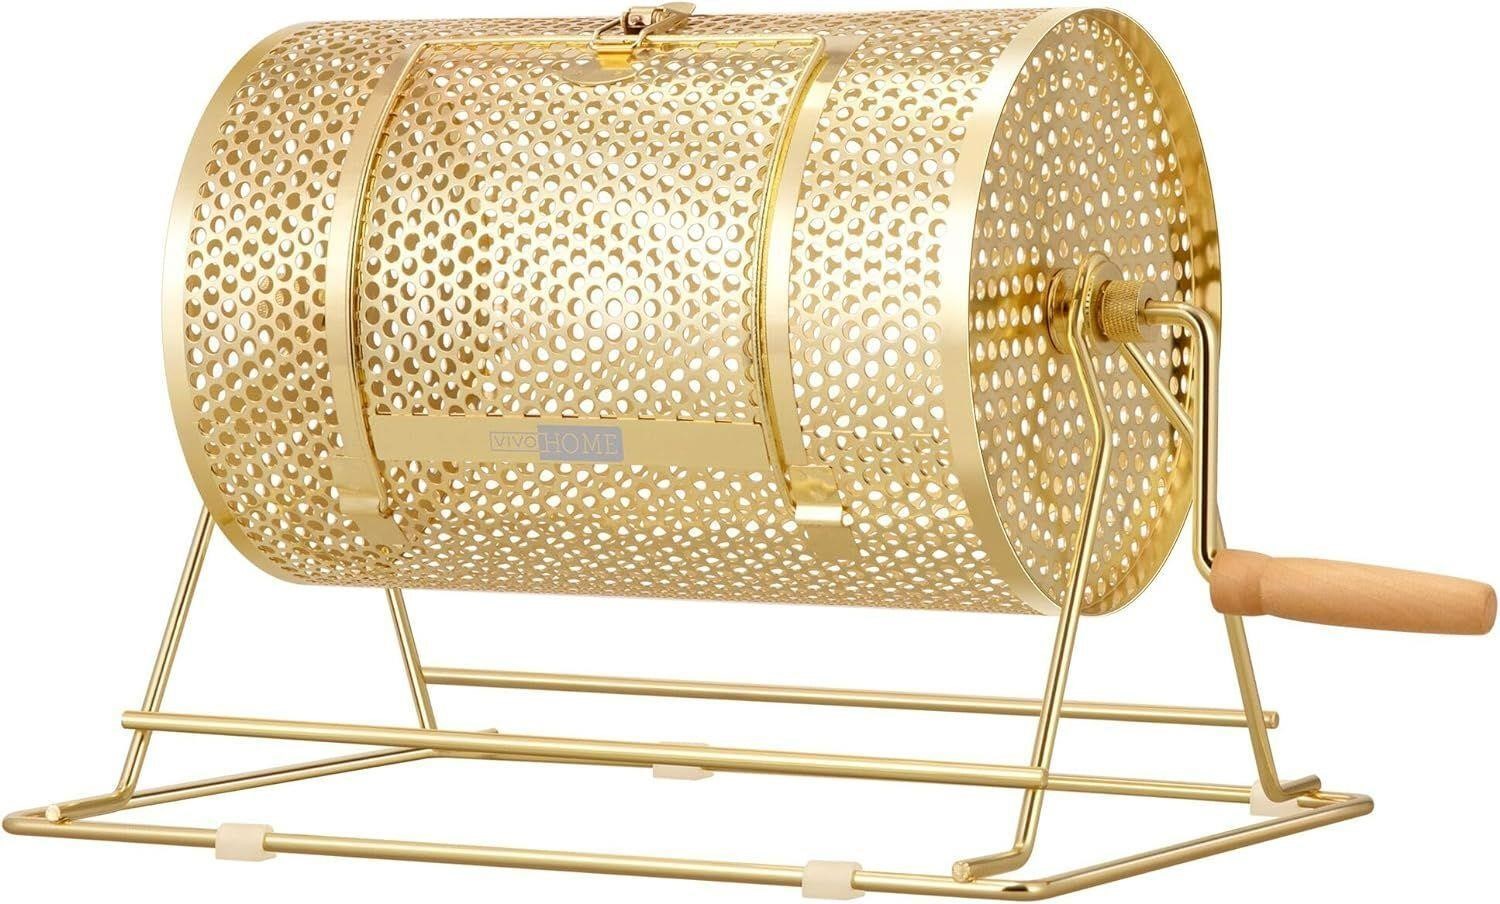 VIVOHOME 16"x12" Brass Plated Raffle Drum Lottery